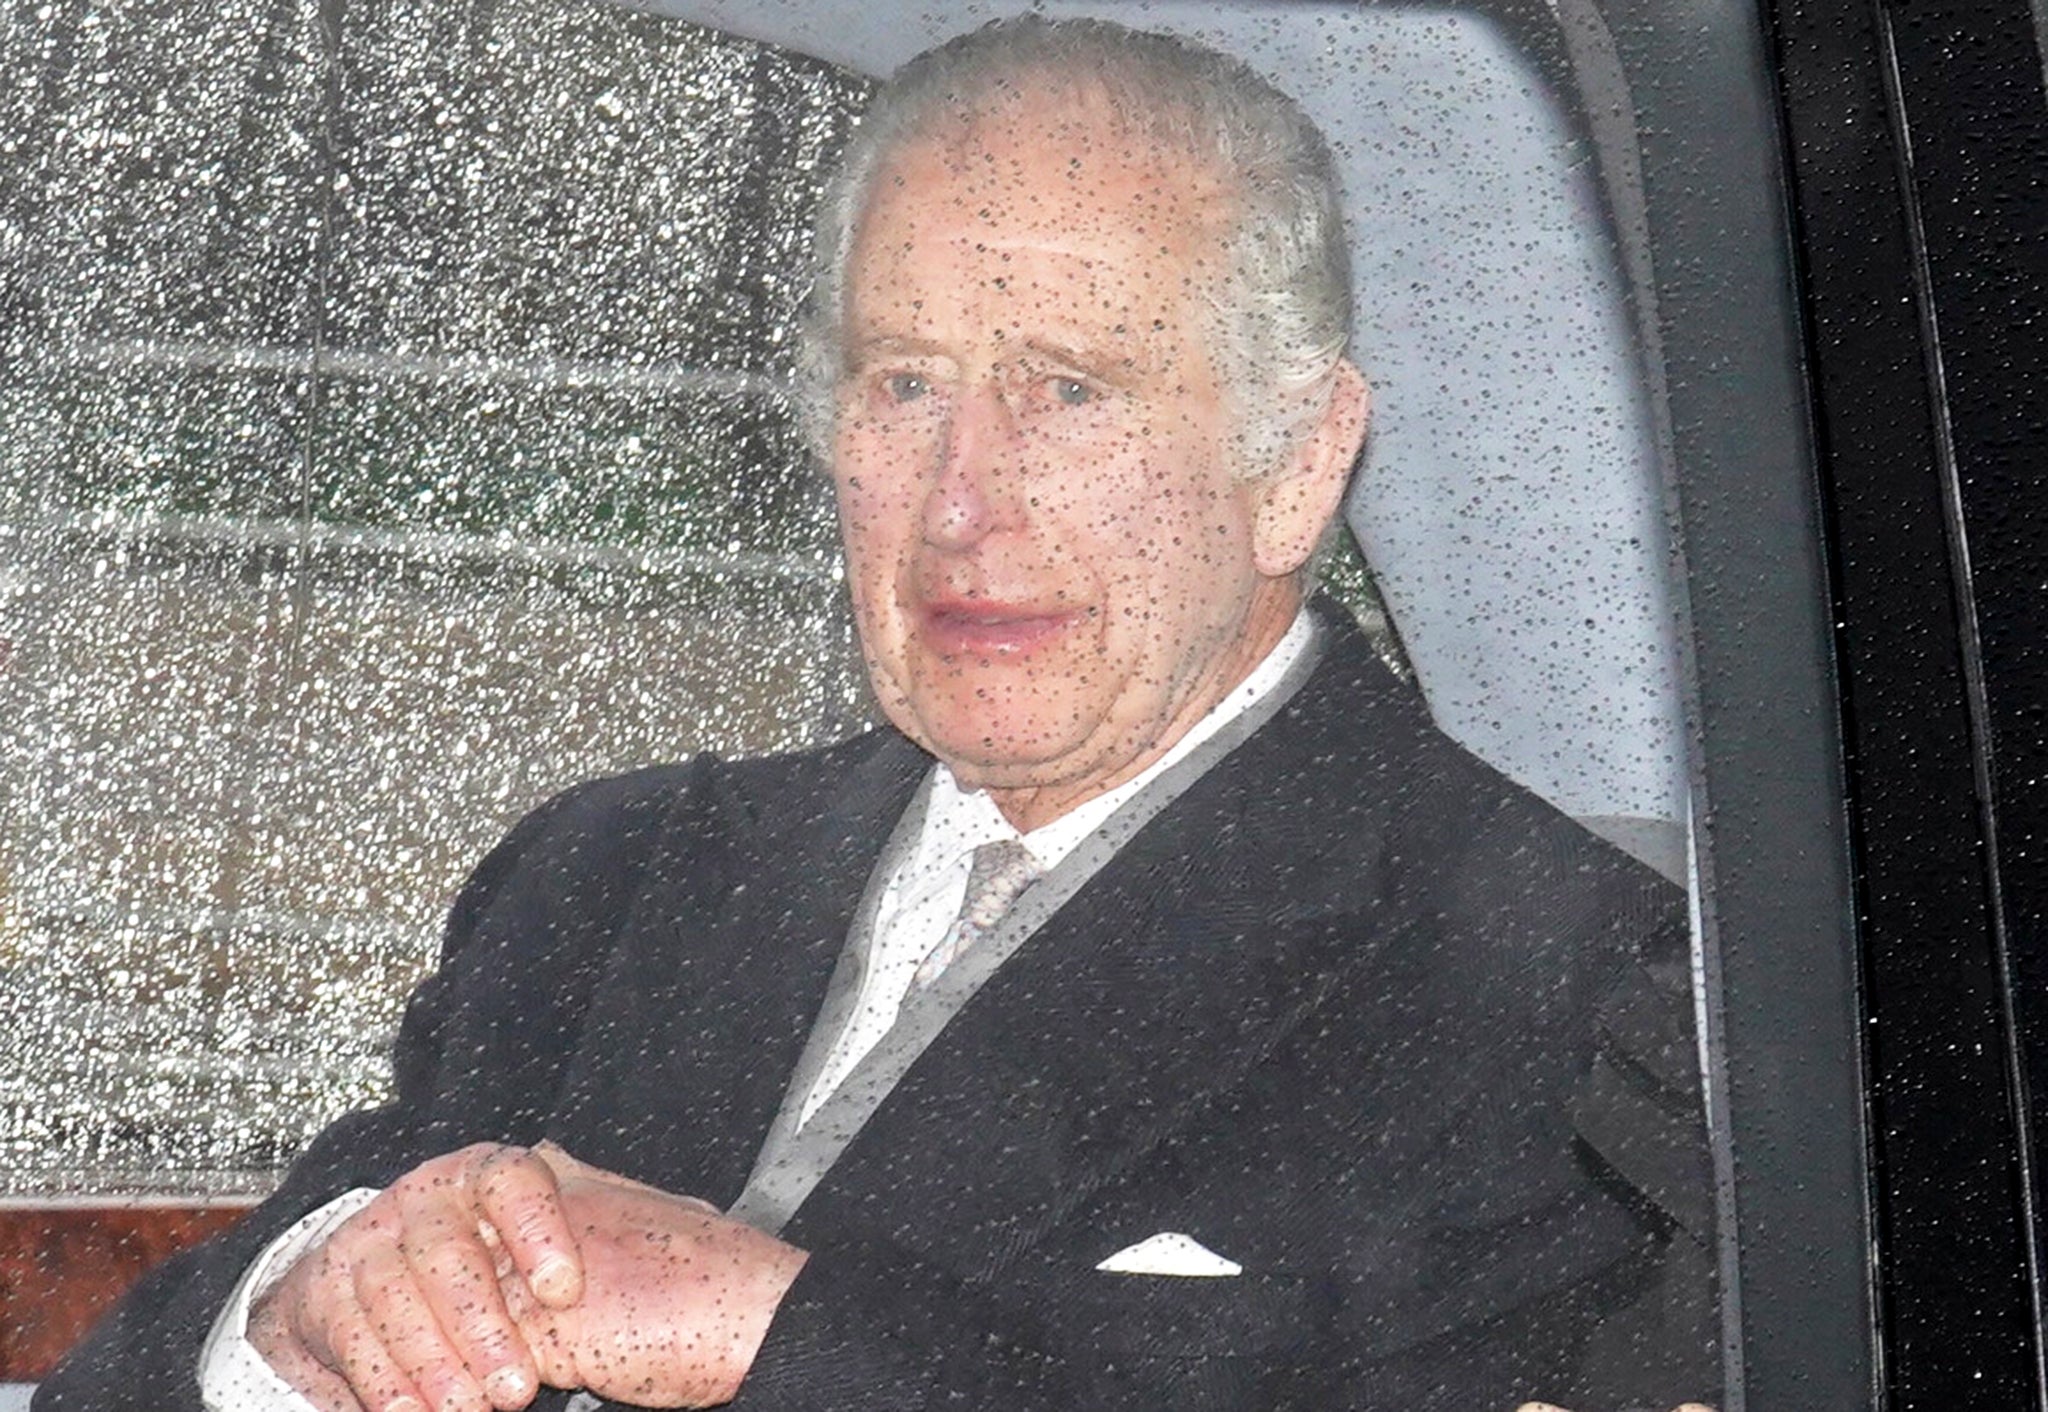 King Charles stayed at Clarence House in London for his cancer treatment before returning to Sandringham